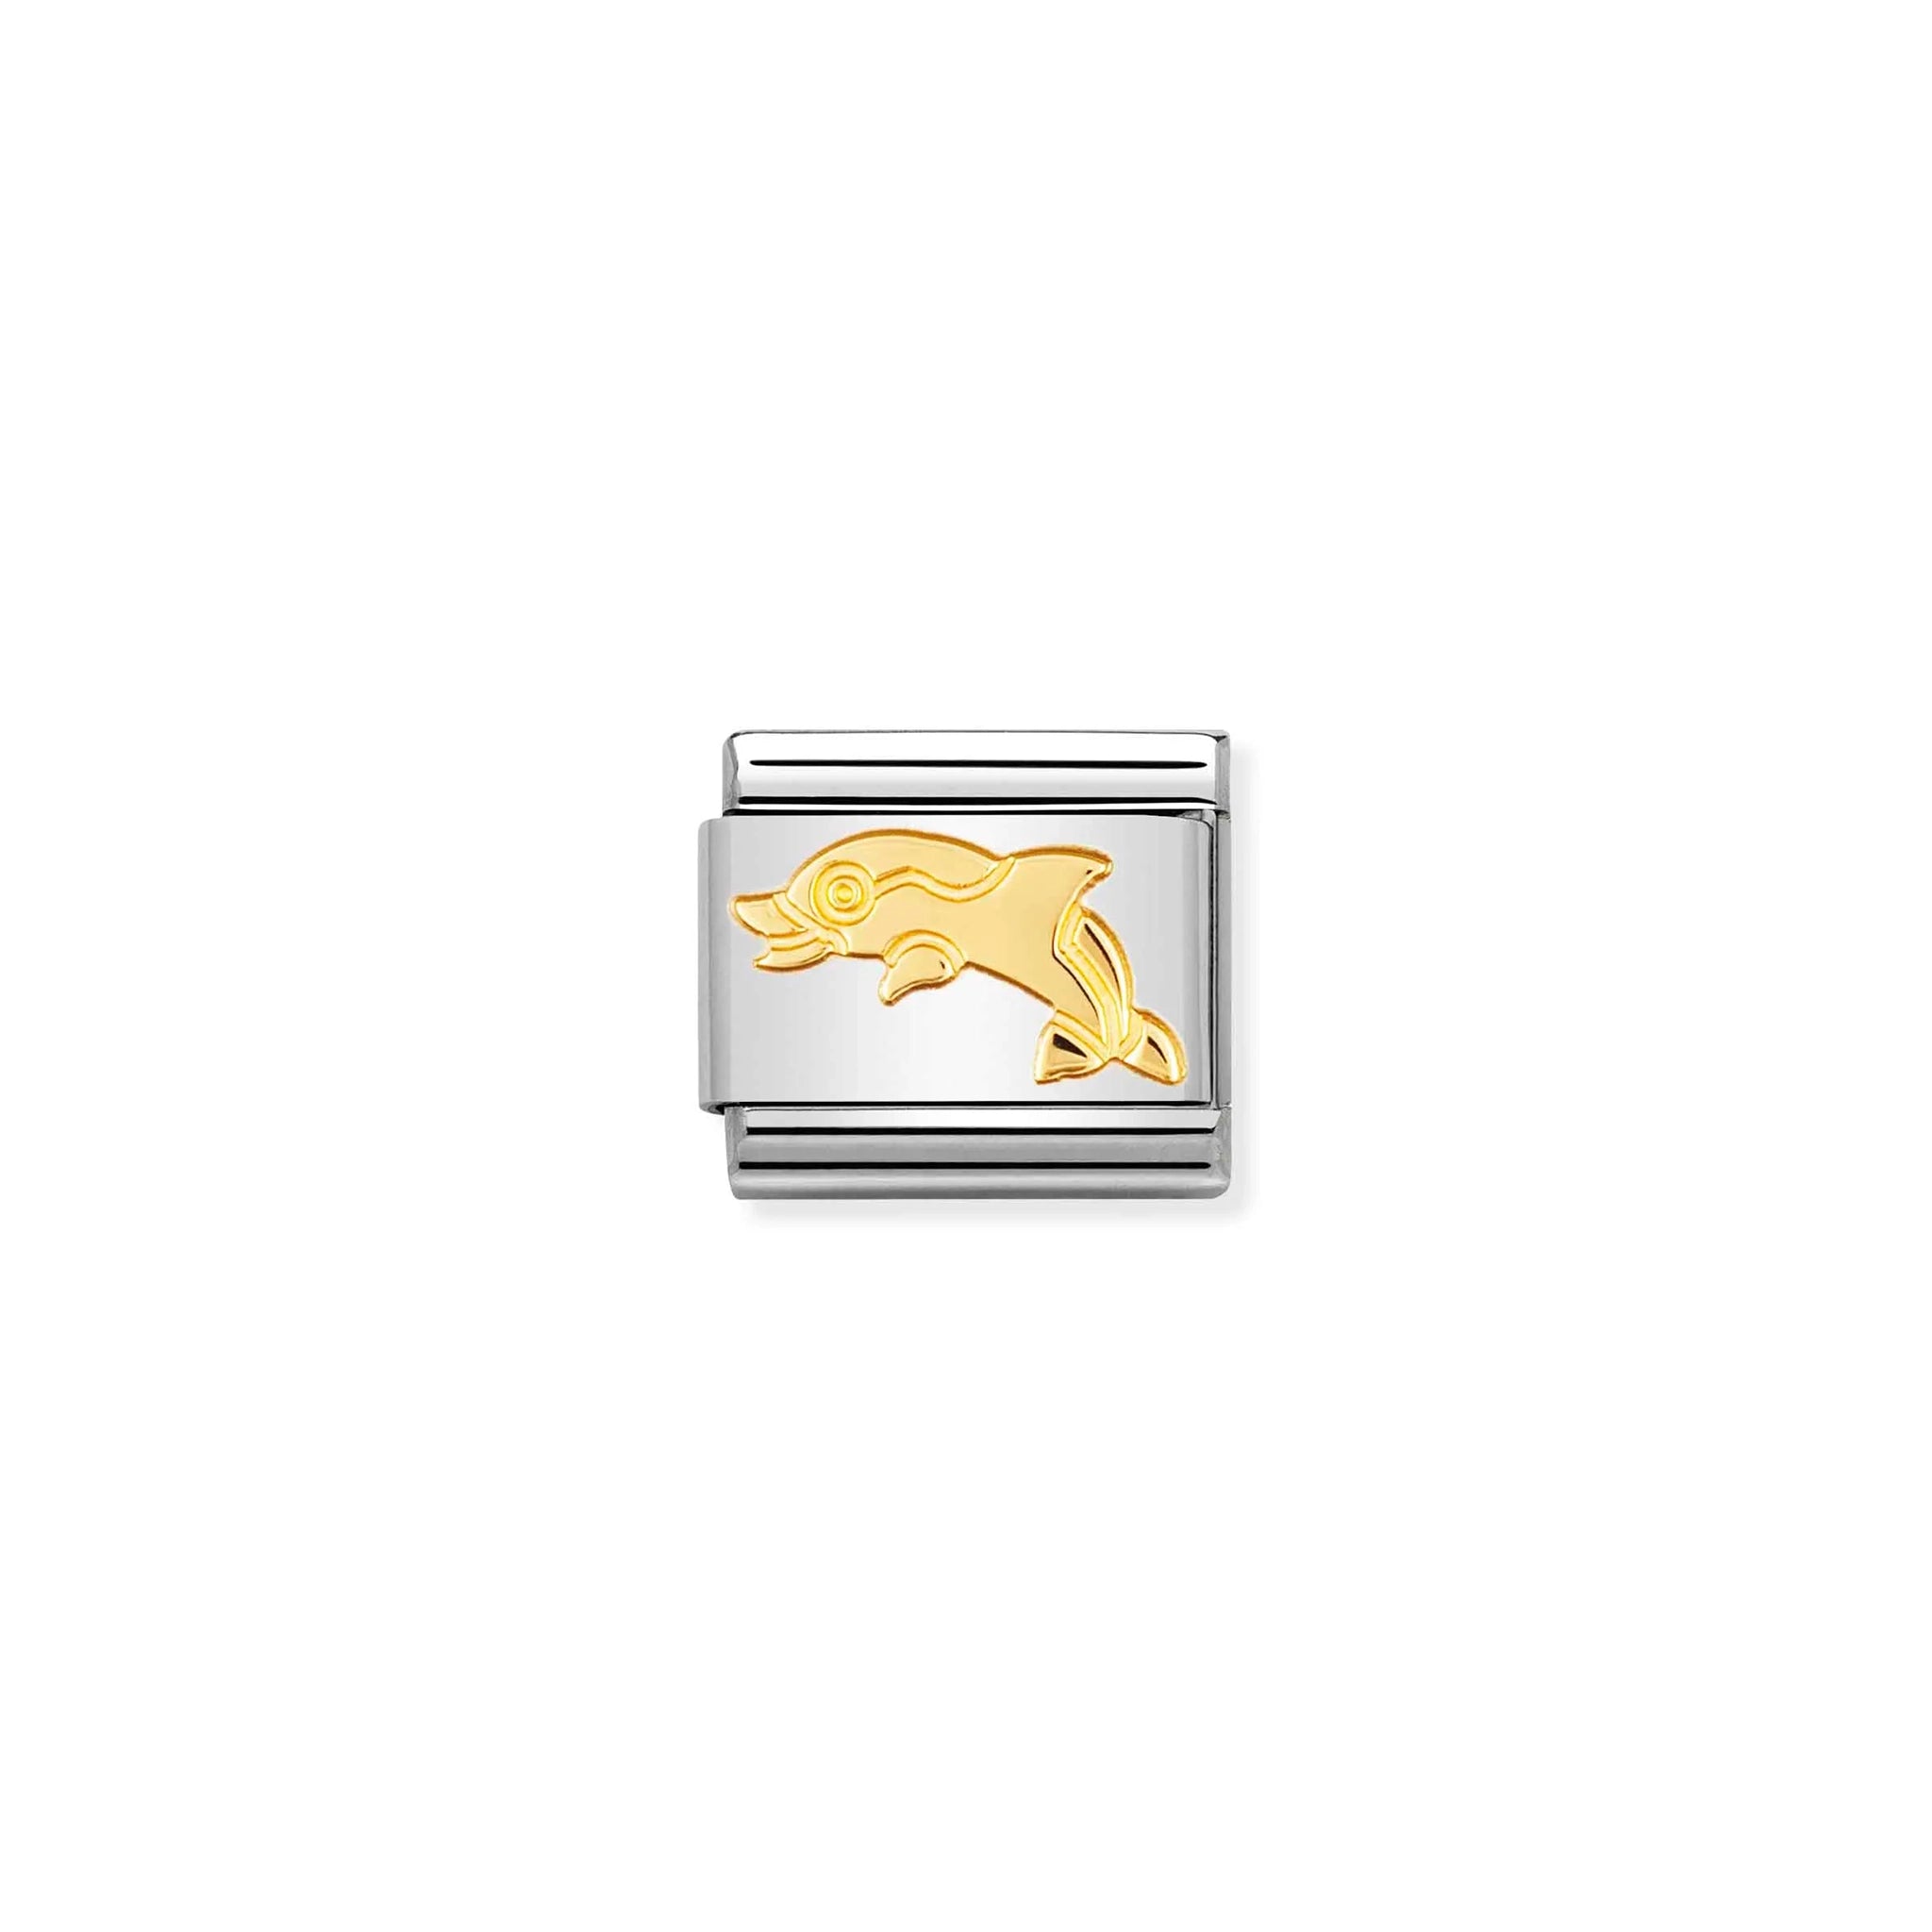 A Nomination charm link featuring a plain gold dolphin design